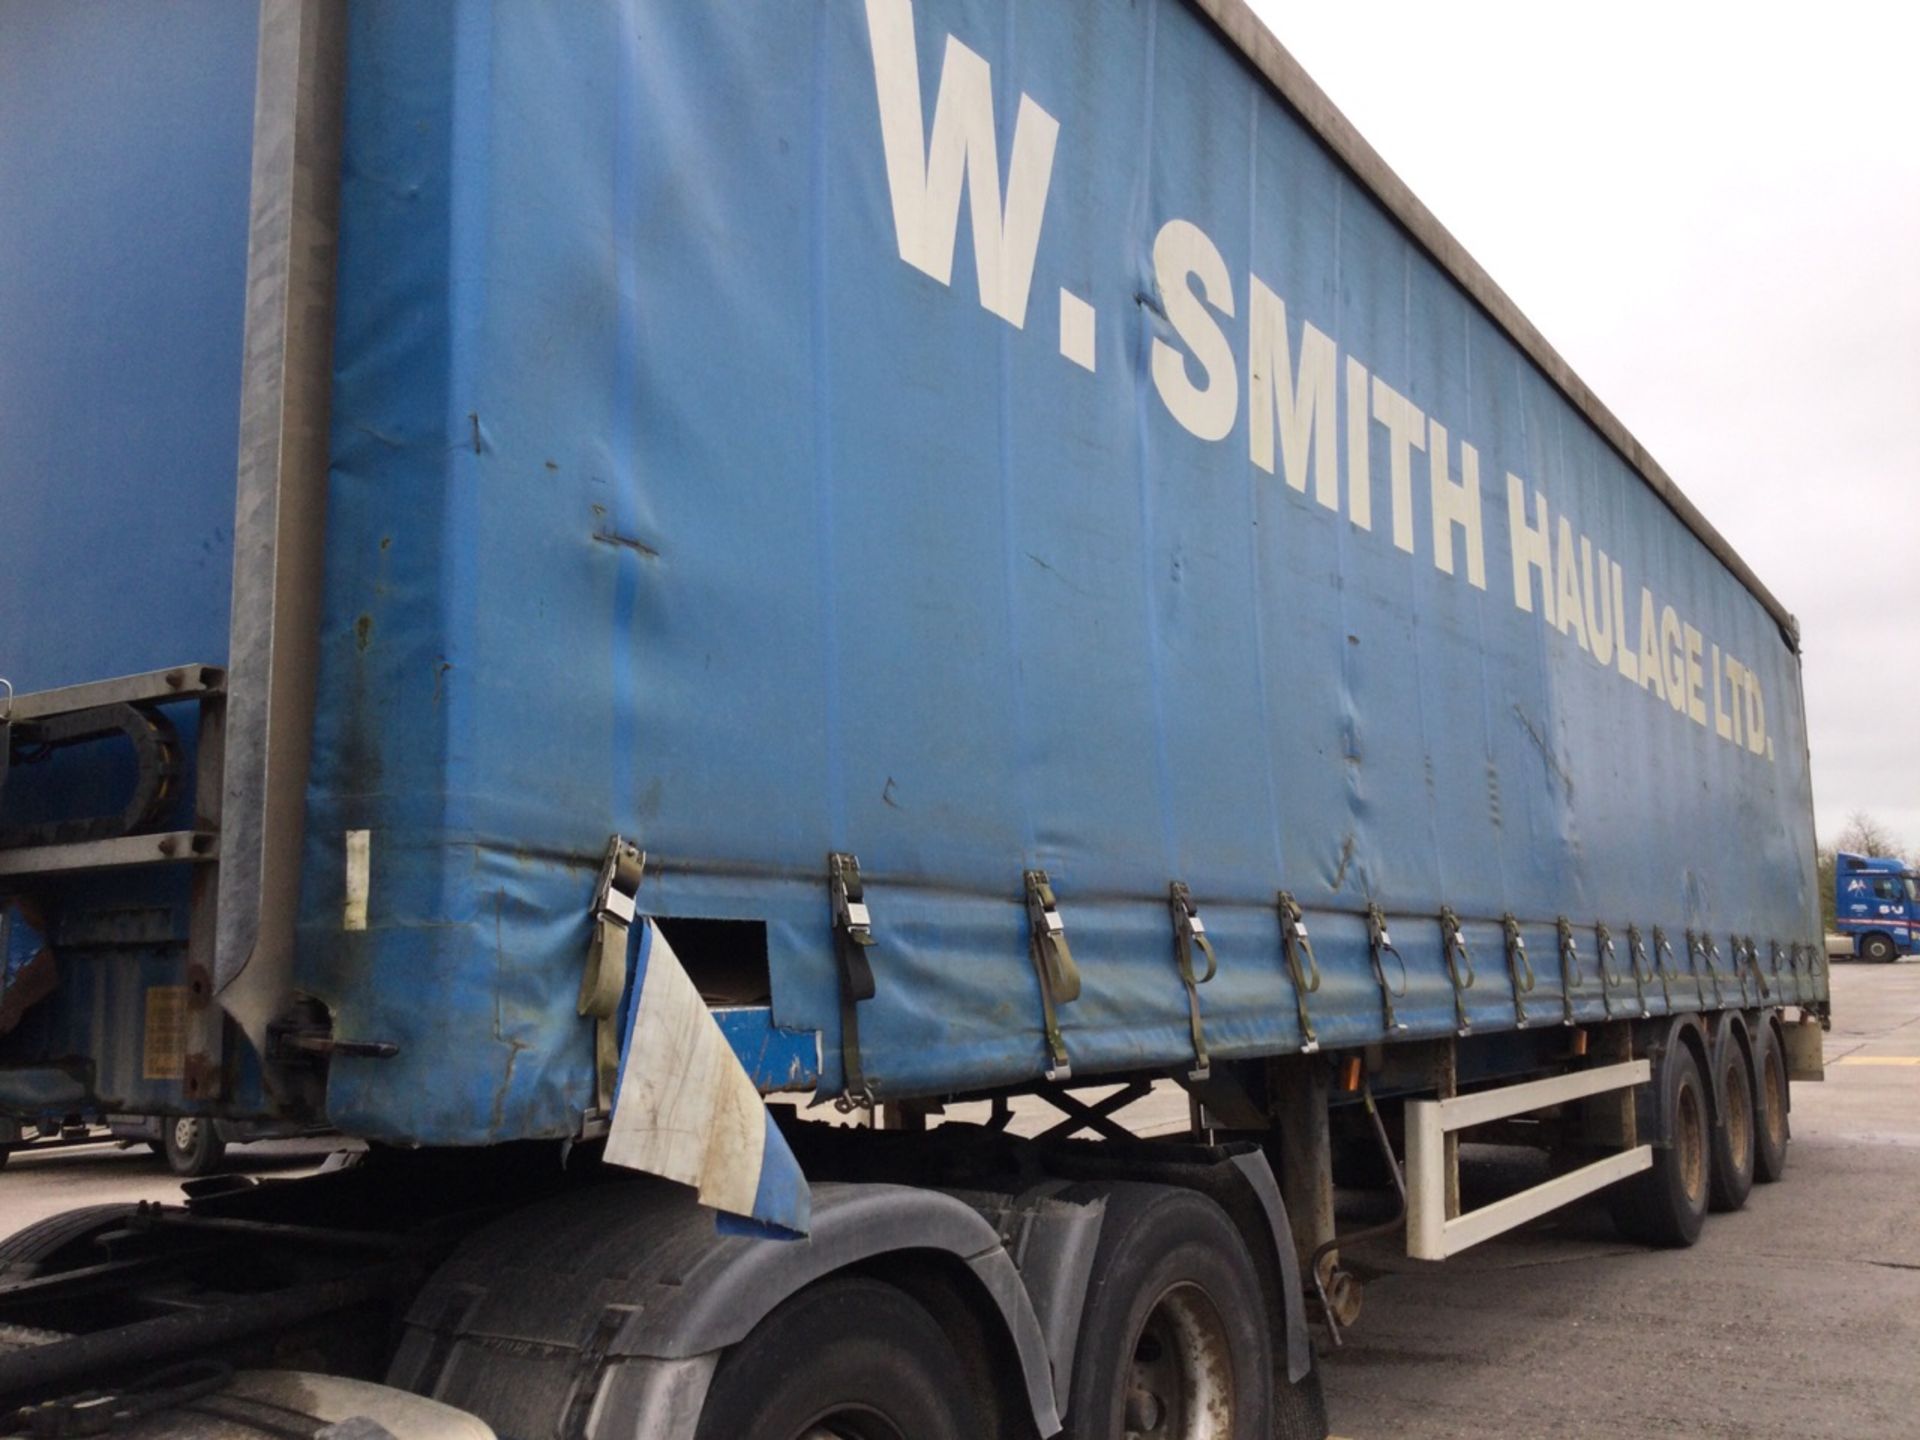 Montracon Tri Axle 13.7m Curtainside Trailer Test Expired, serial number C141149 , year 2003. Note